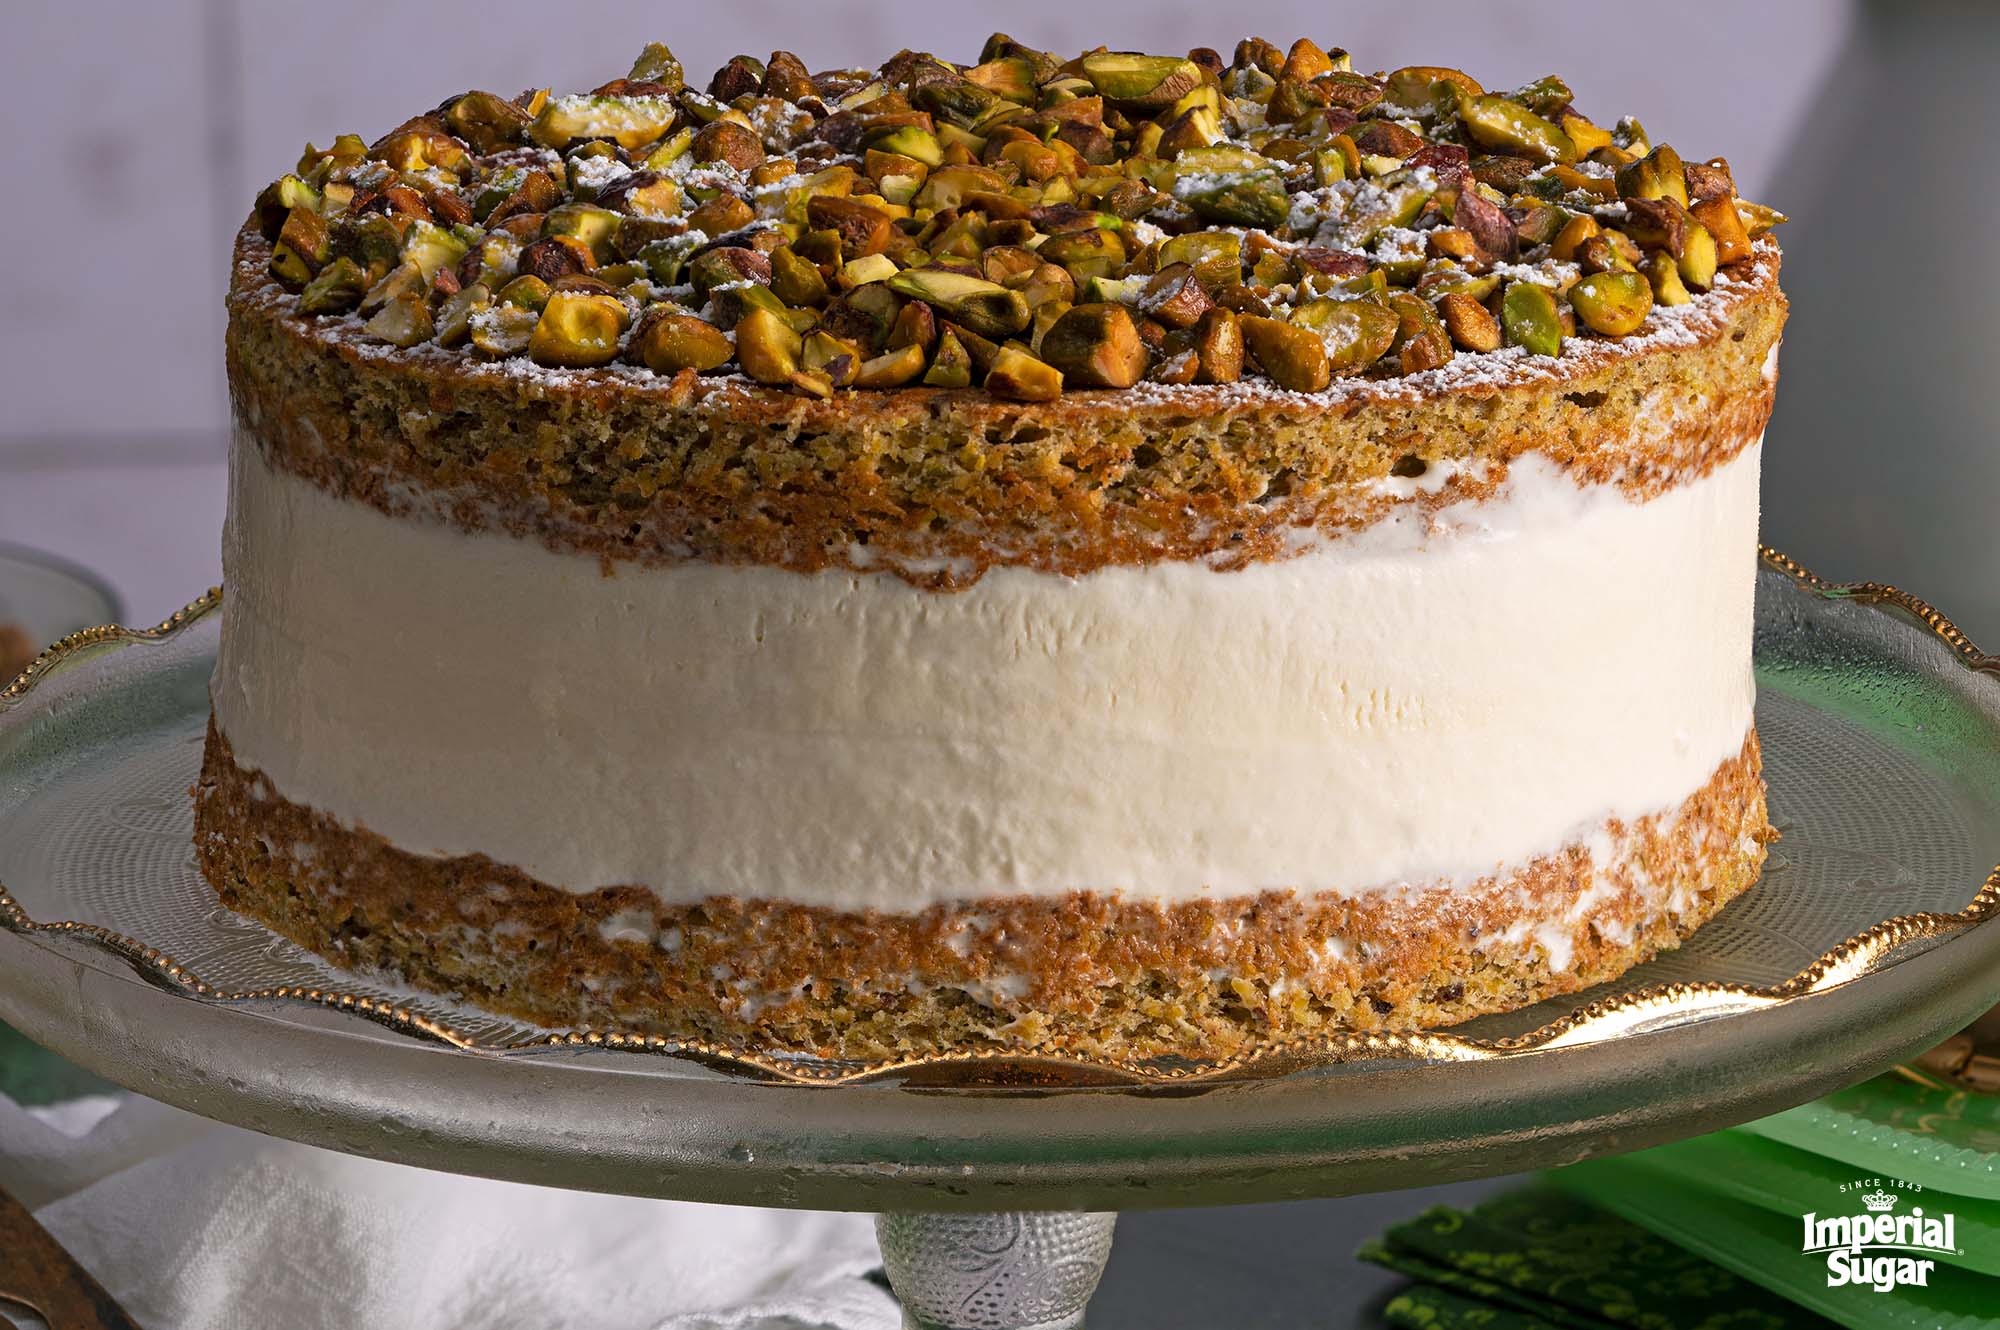 It's finally here! ✨ This pistachio cake is made with real pistachios and  pistachio paste, full of pistachio flavor, topped and covered… | Instagram